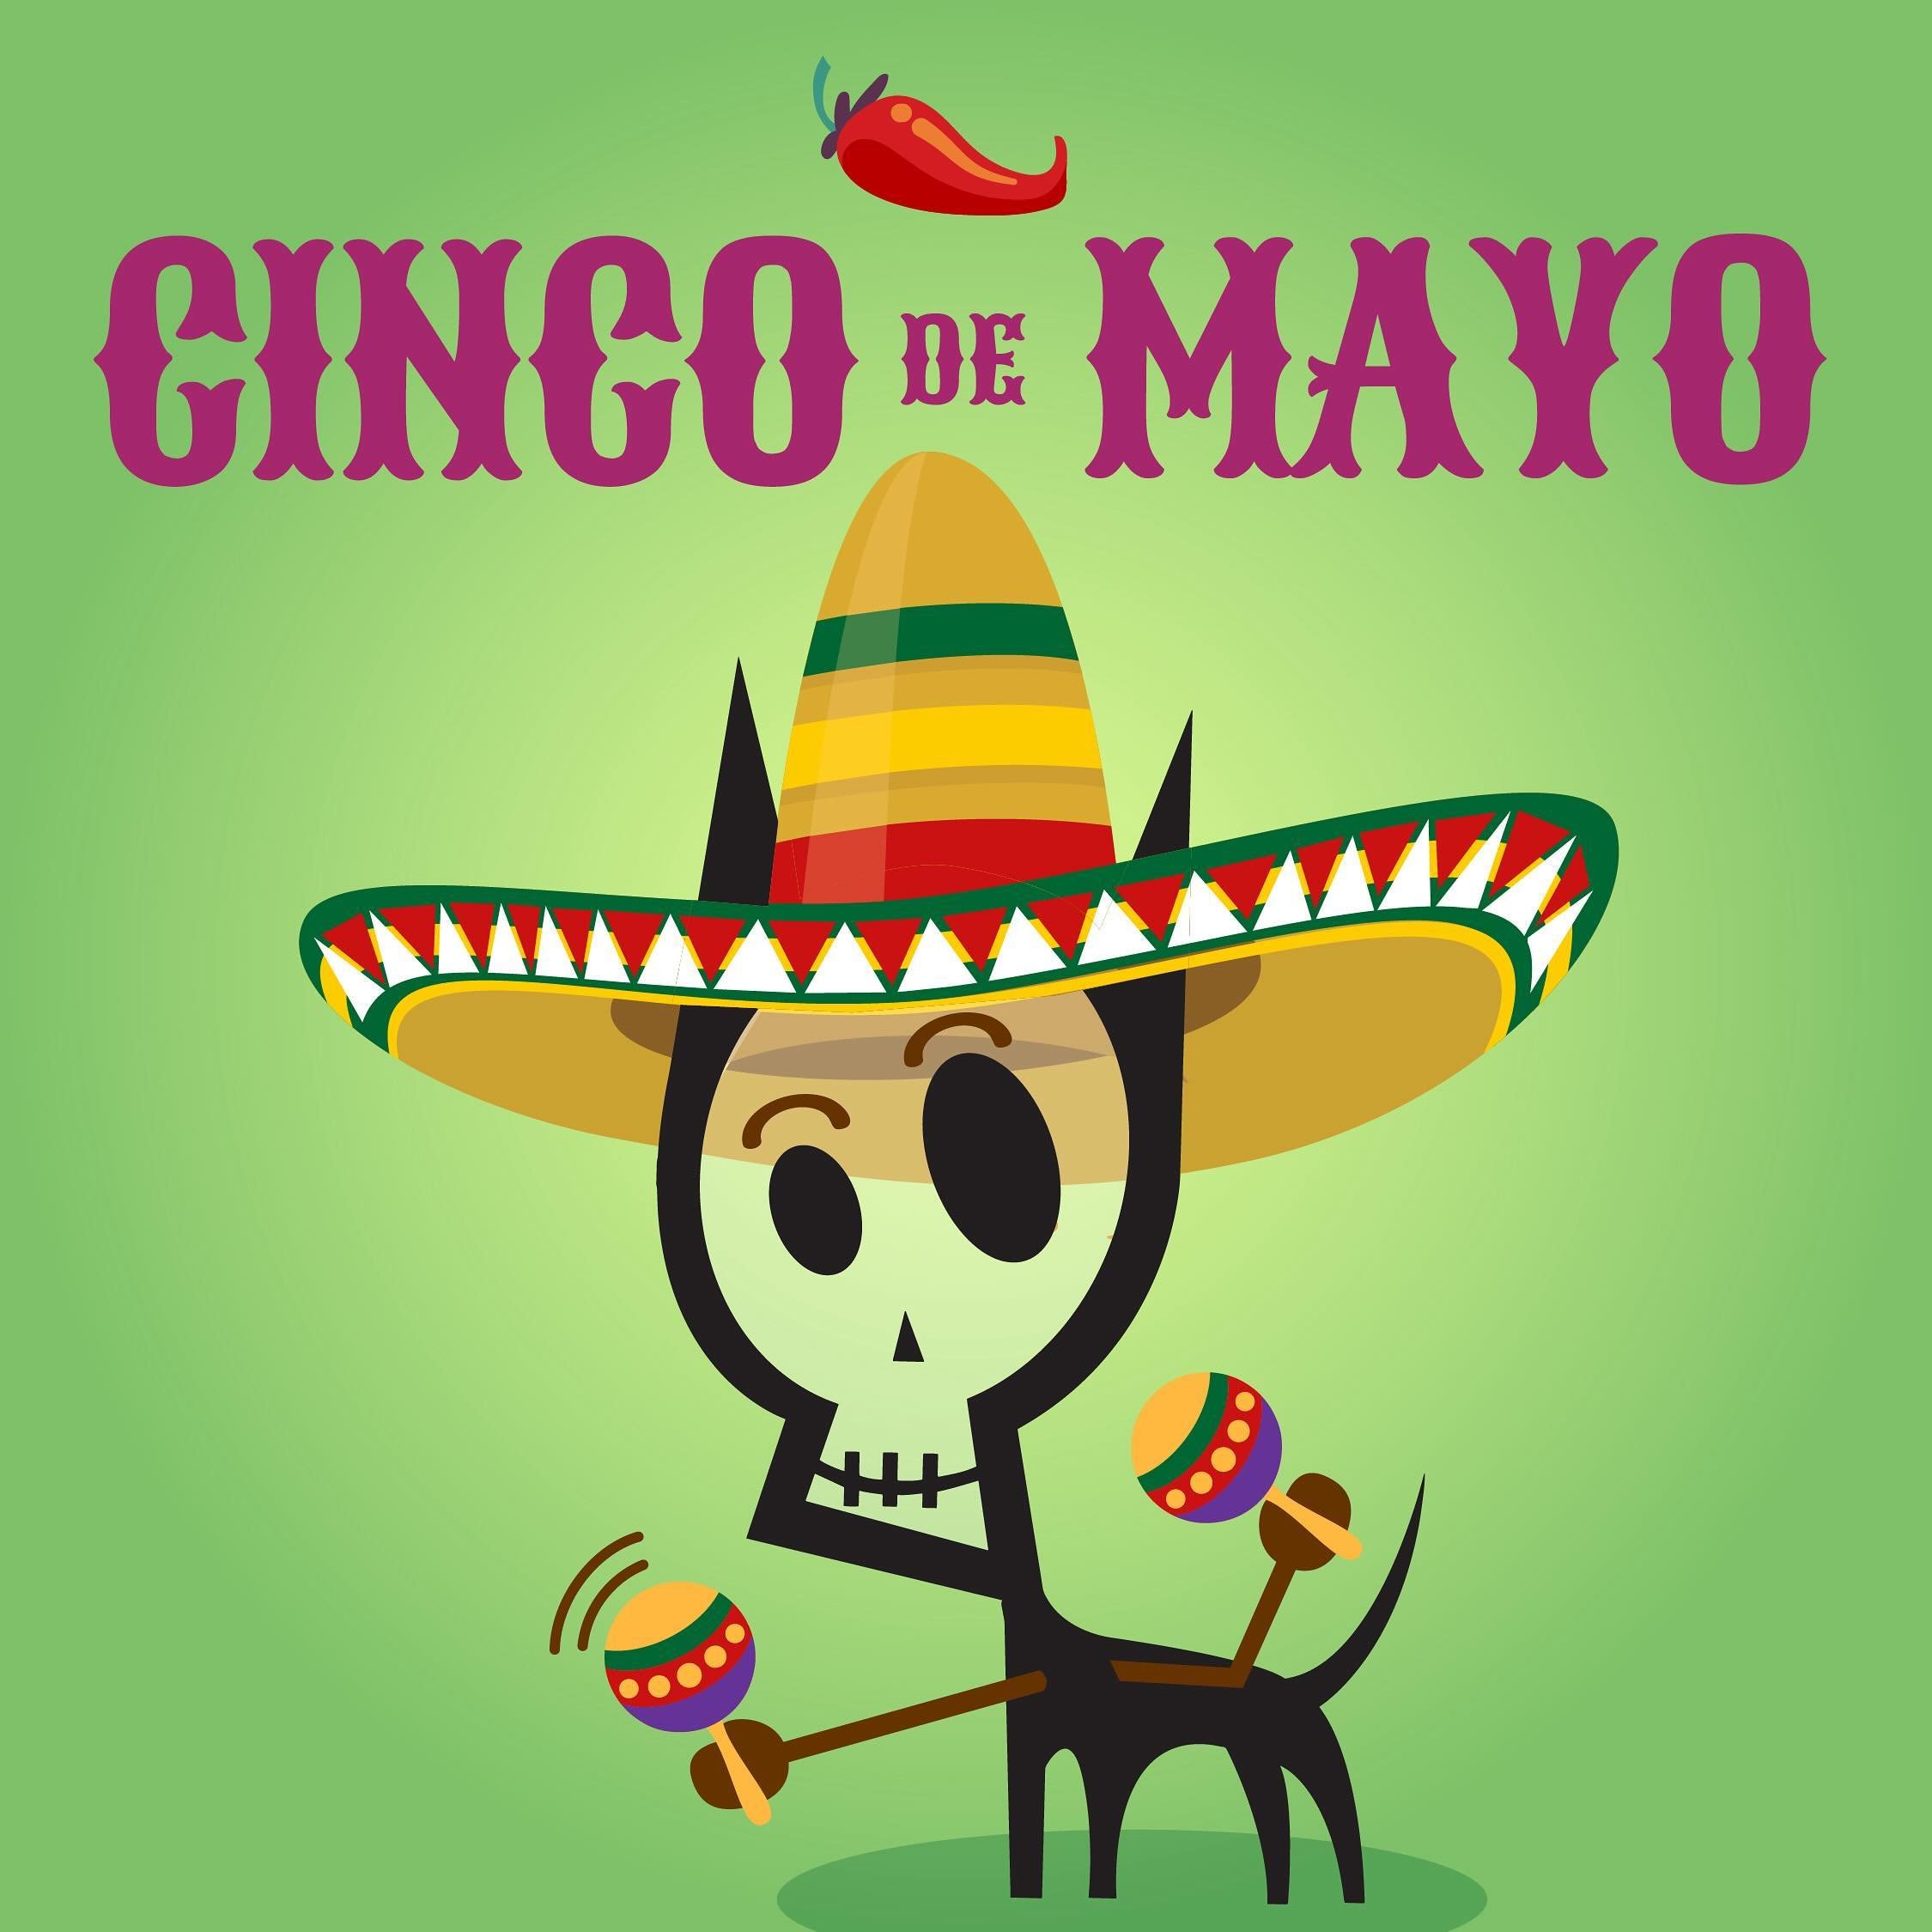 🪇🇲🇽 FUN FACTS 🇲🇽🪇
1. Cinco de Mayo is not Mexico&rsquo;s Independence Day
2. Americans eat over 80 million pounds of avocados on Cinco de Mayo alone! 
3. The largest Cindo de Mayo celebration is in Los Angeles ☀️